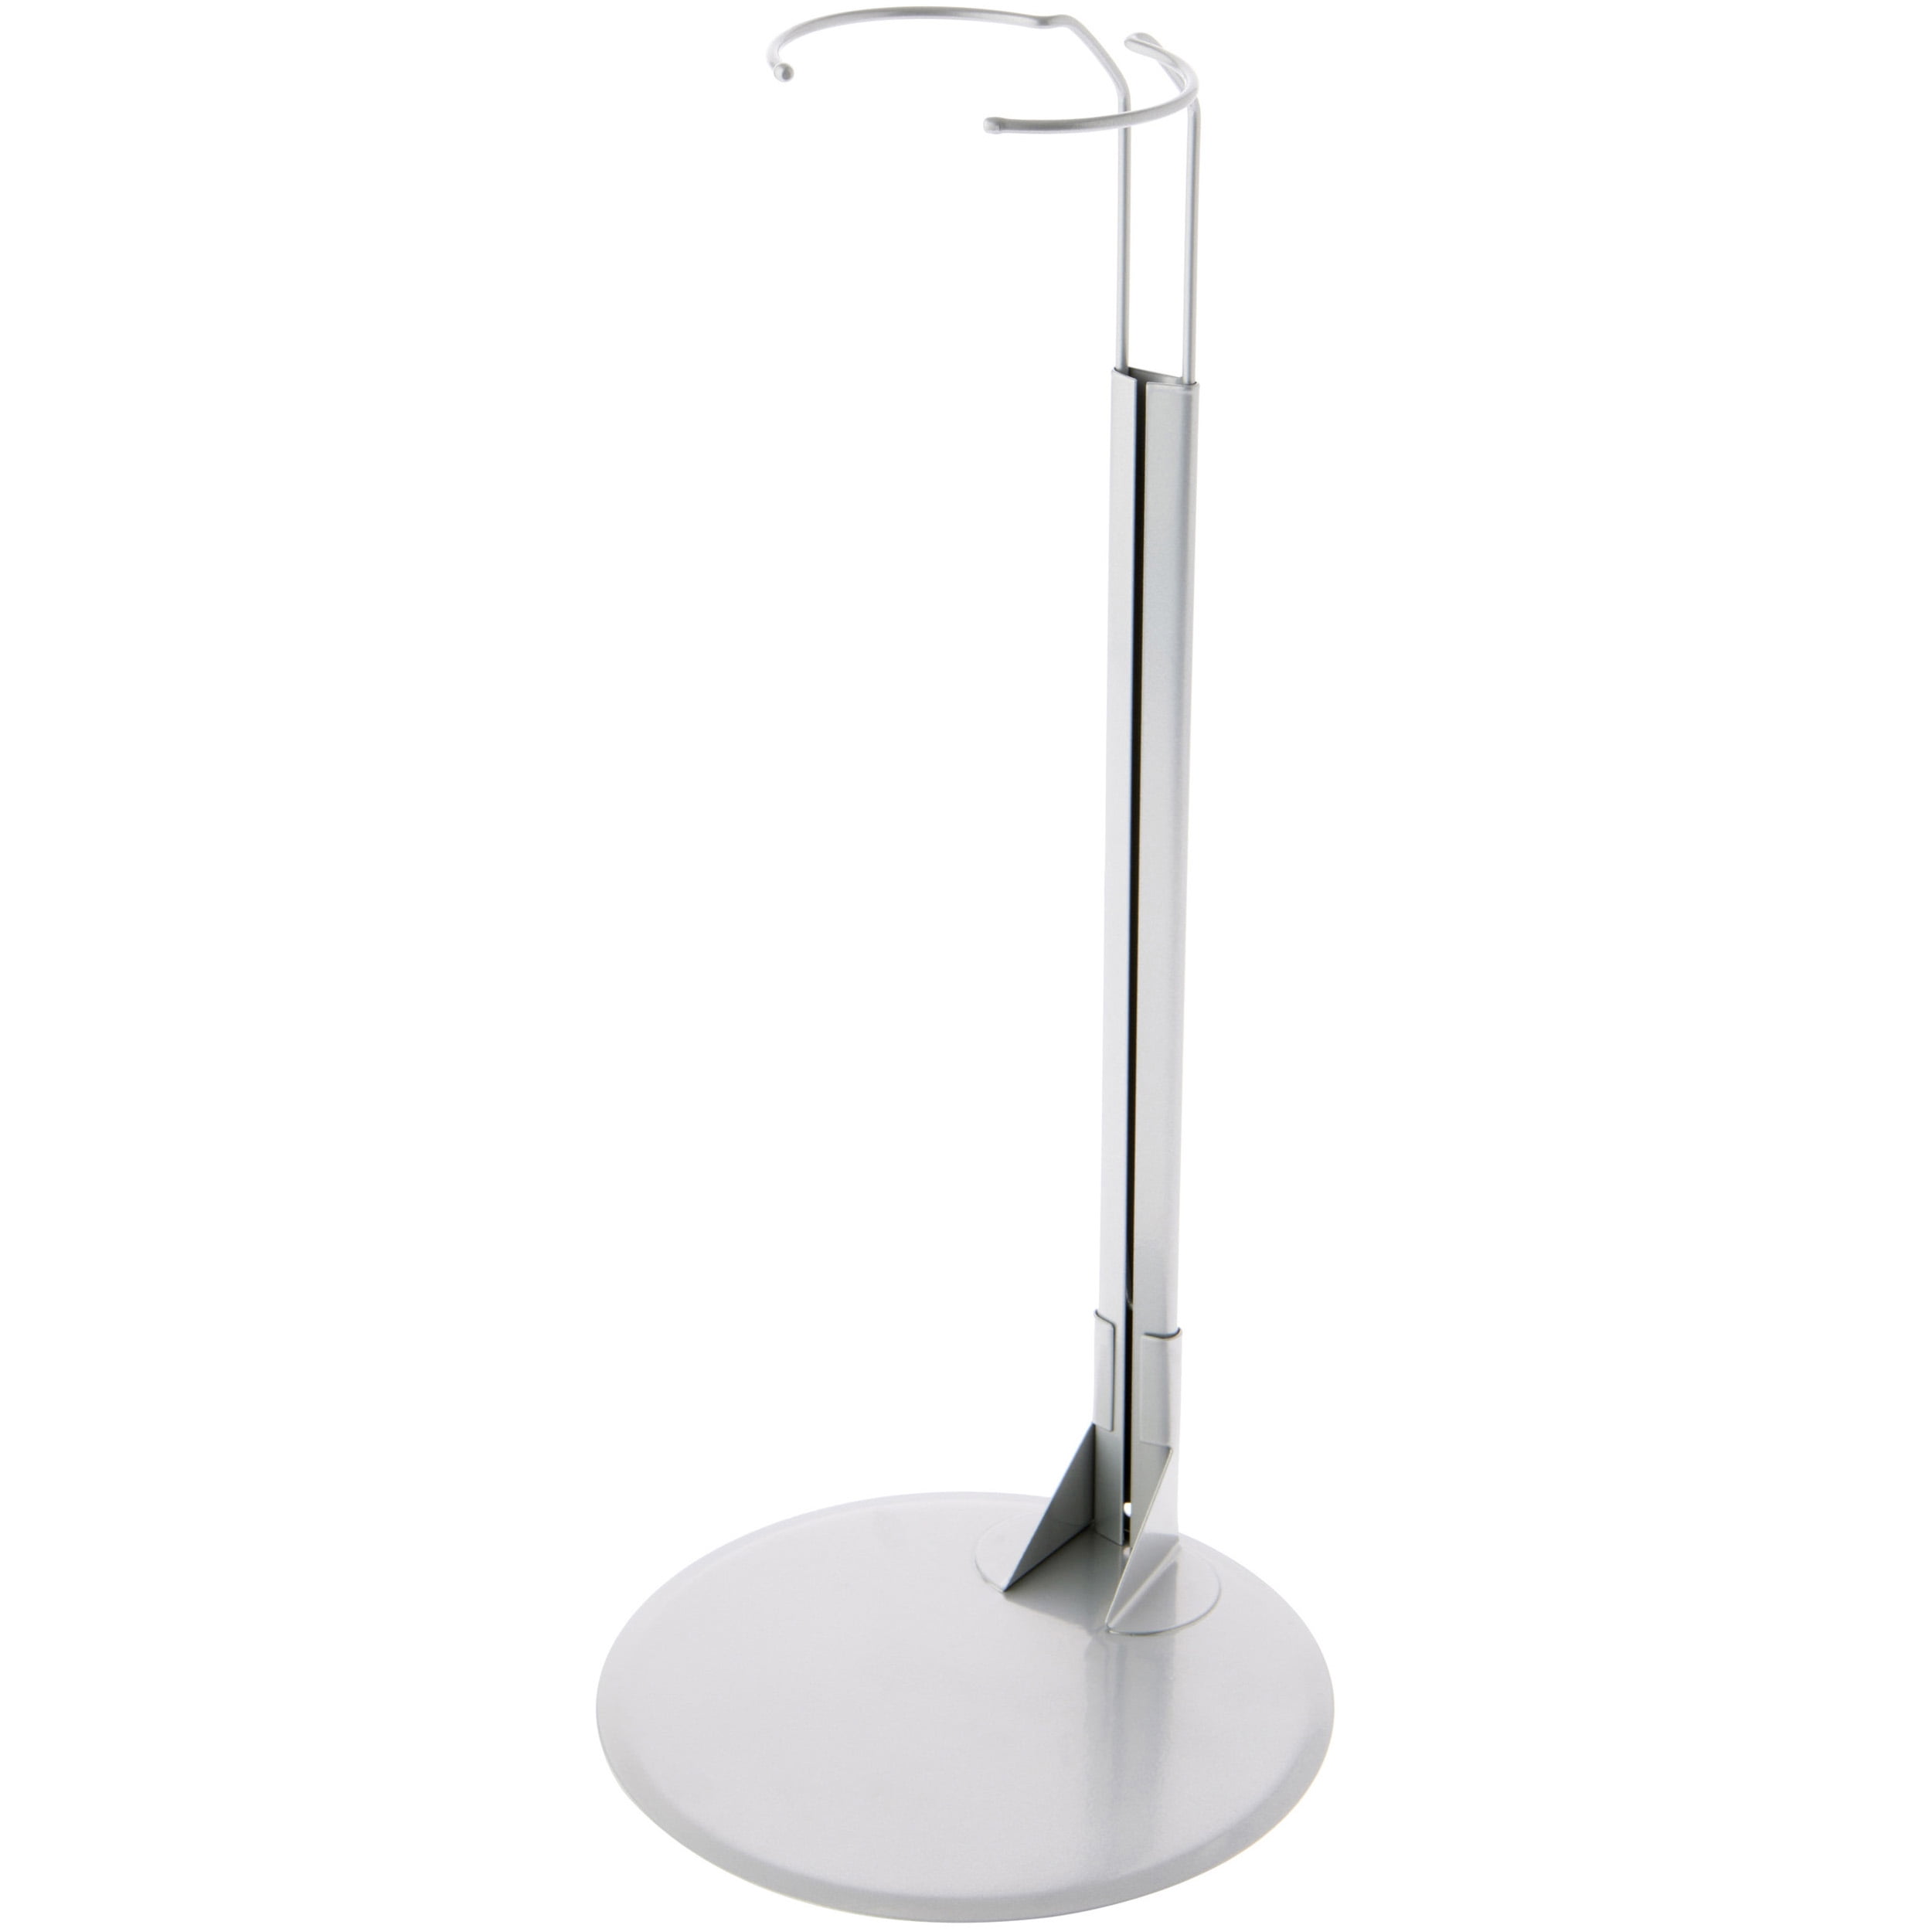 Plymor DSP-15S Silver Adjustable Doll Stand, fits 25, 26, 27, 28, 29, 30,  31, 32, 33, and 34 inch Dolls, Waist is 3.75 to 5 inches wide, 11 to 13  inches around, Pack of 6 